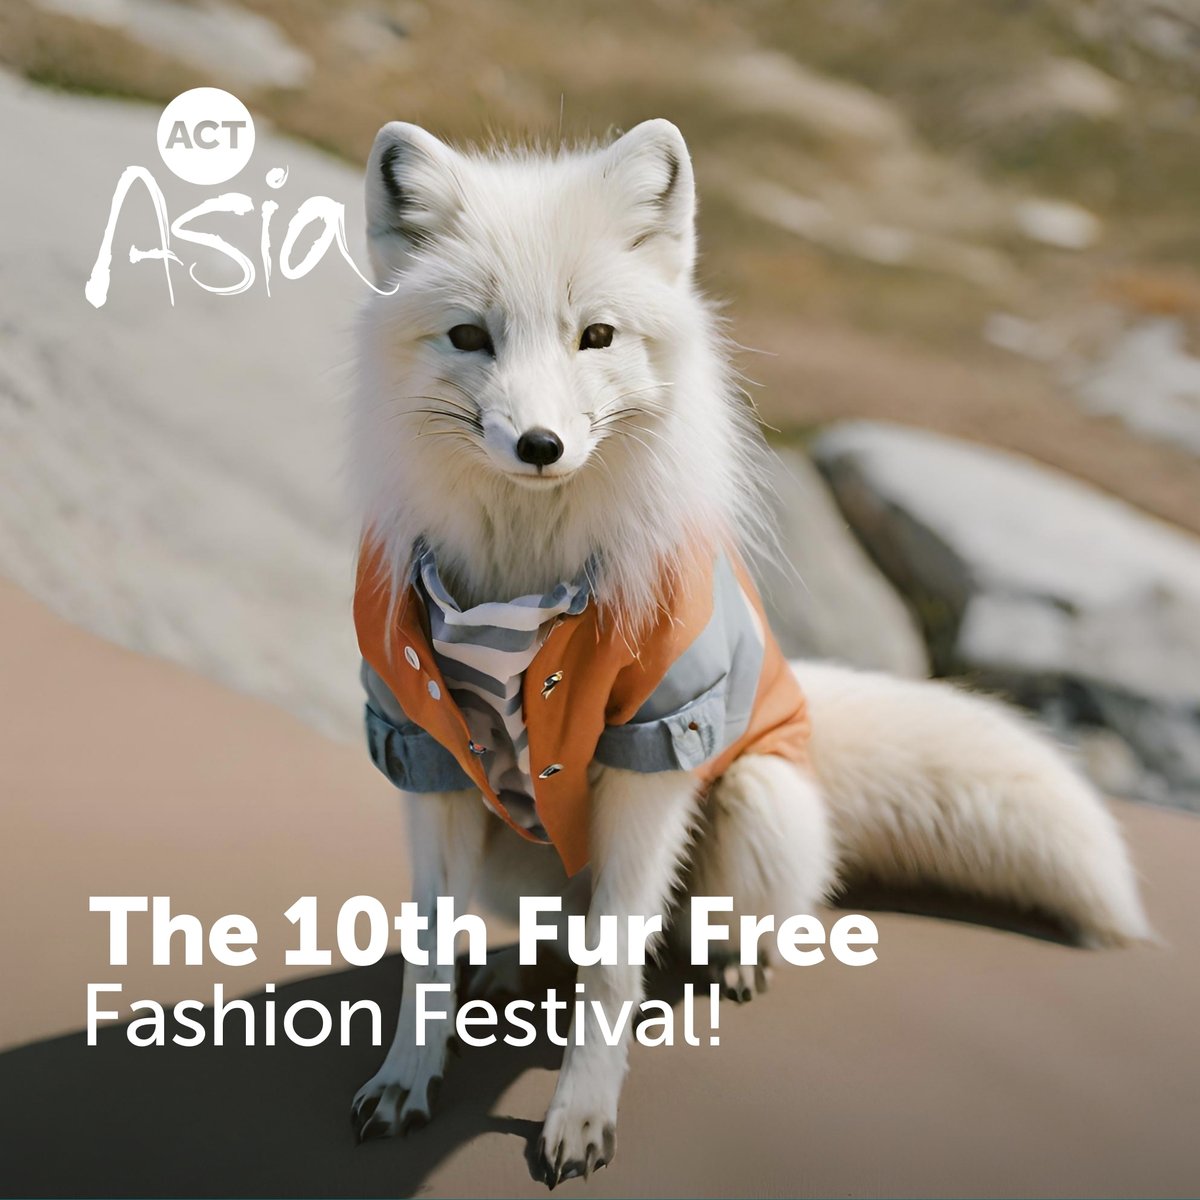 Coming Soon! Our 10th Sustainable Fur Free Fashion Festival is the most ambitious yet An integral part of the Shenzhen Fashion Week! With a fashion show & 2 forums with expert speakers from industry, media & retailers tinyurl.com/3myzyuv2 #Asia #fashion